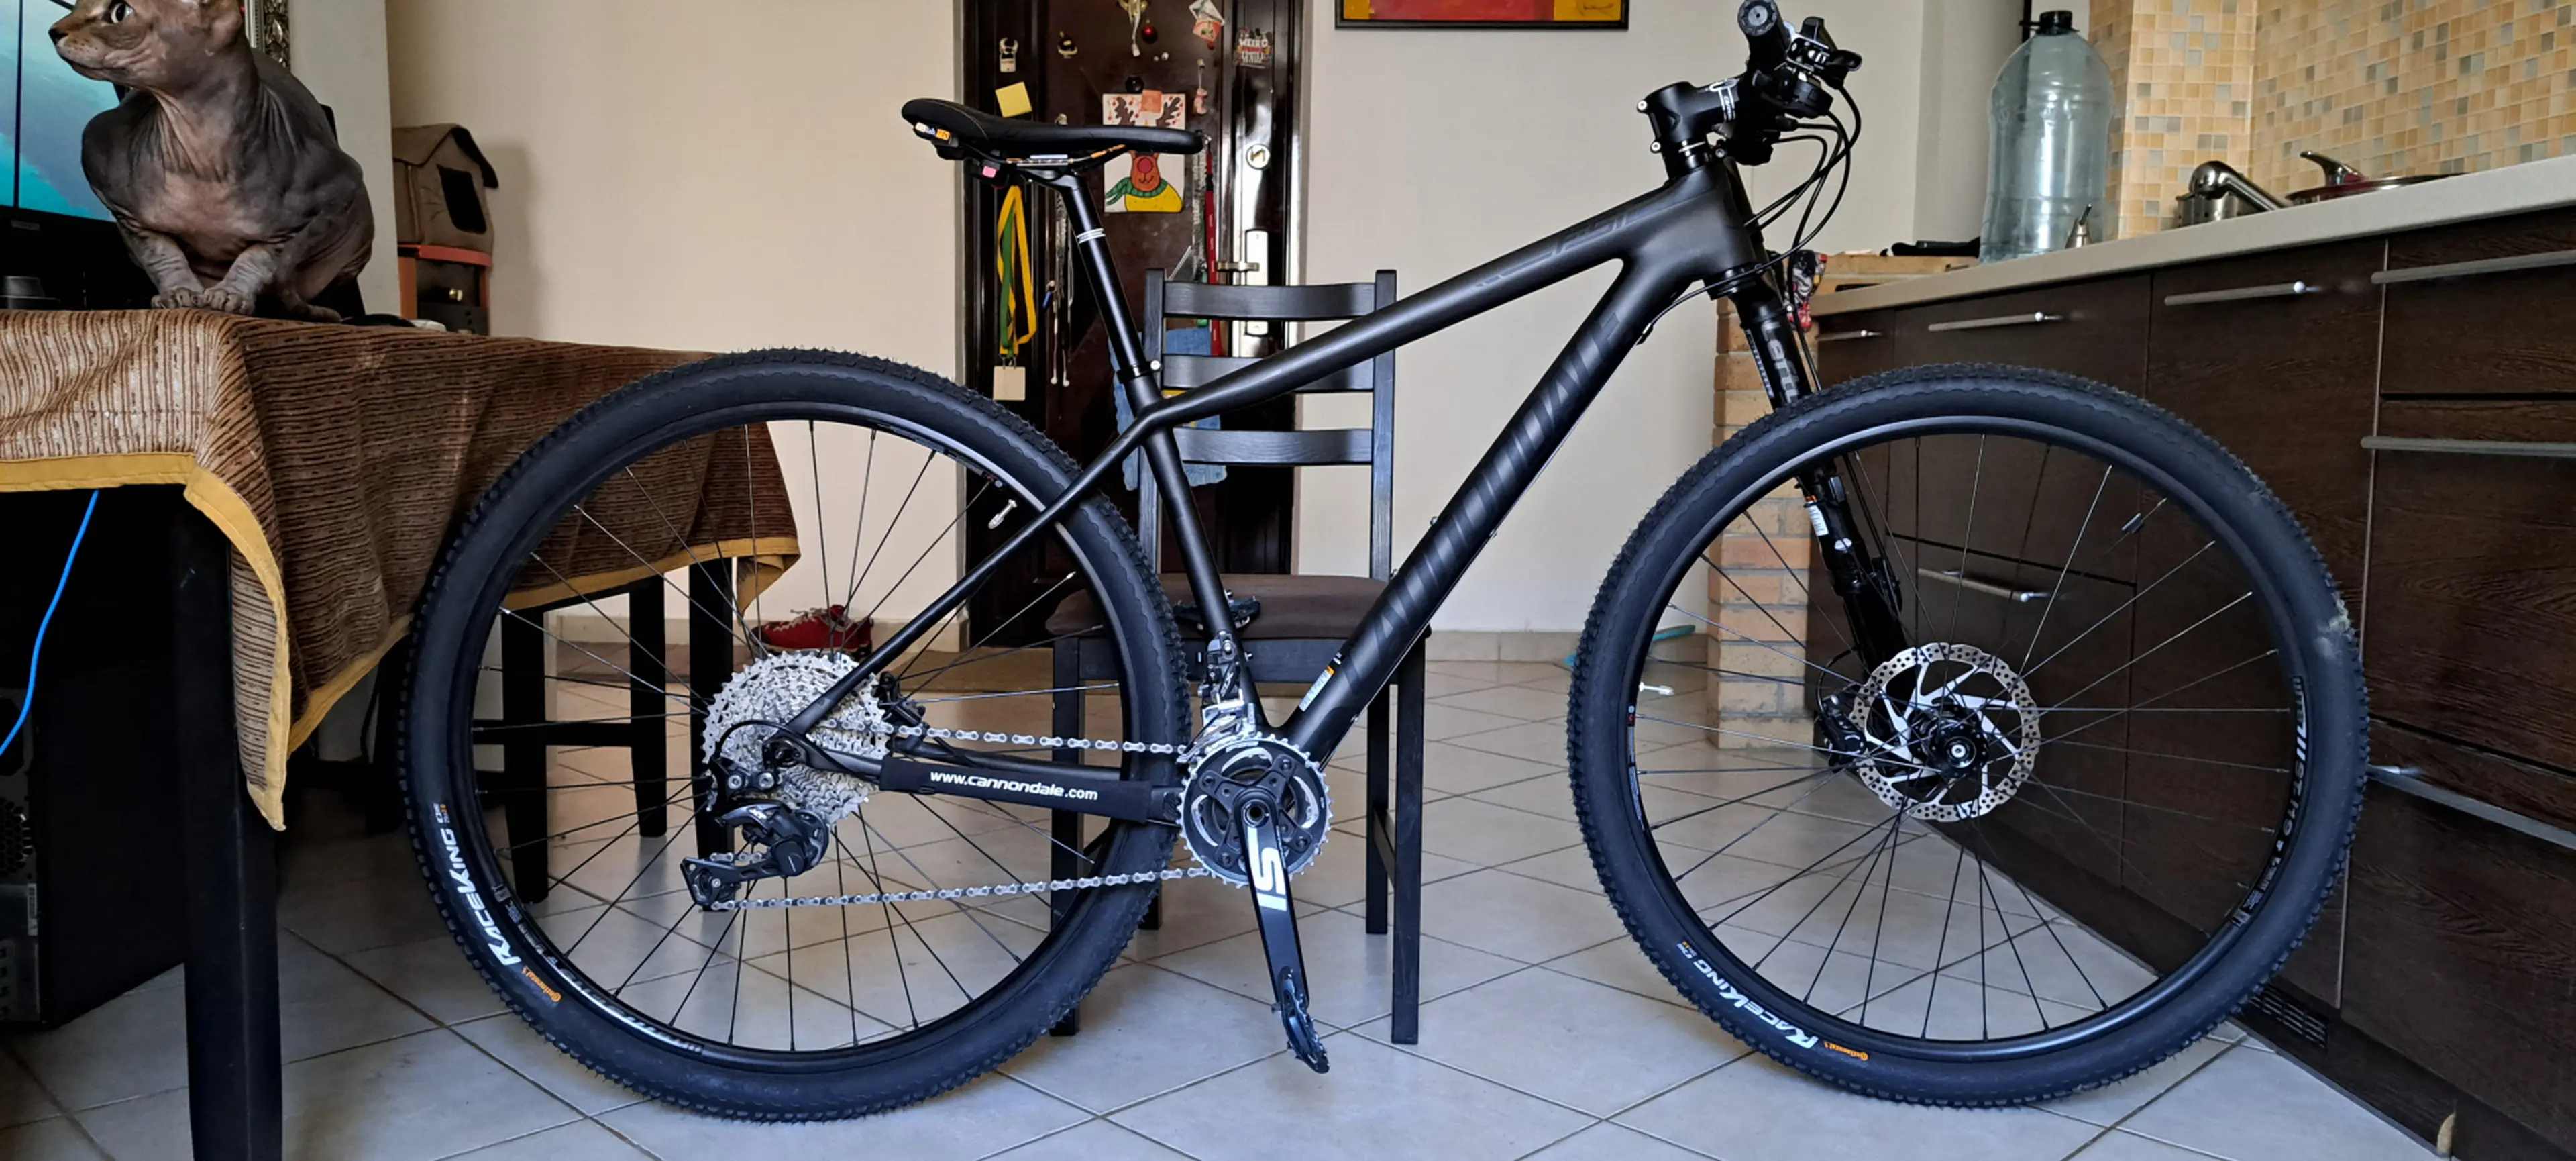 1. Bicicleta F-Si Cross Country Bikes - Cannondale